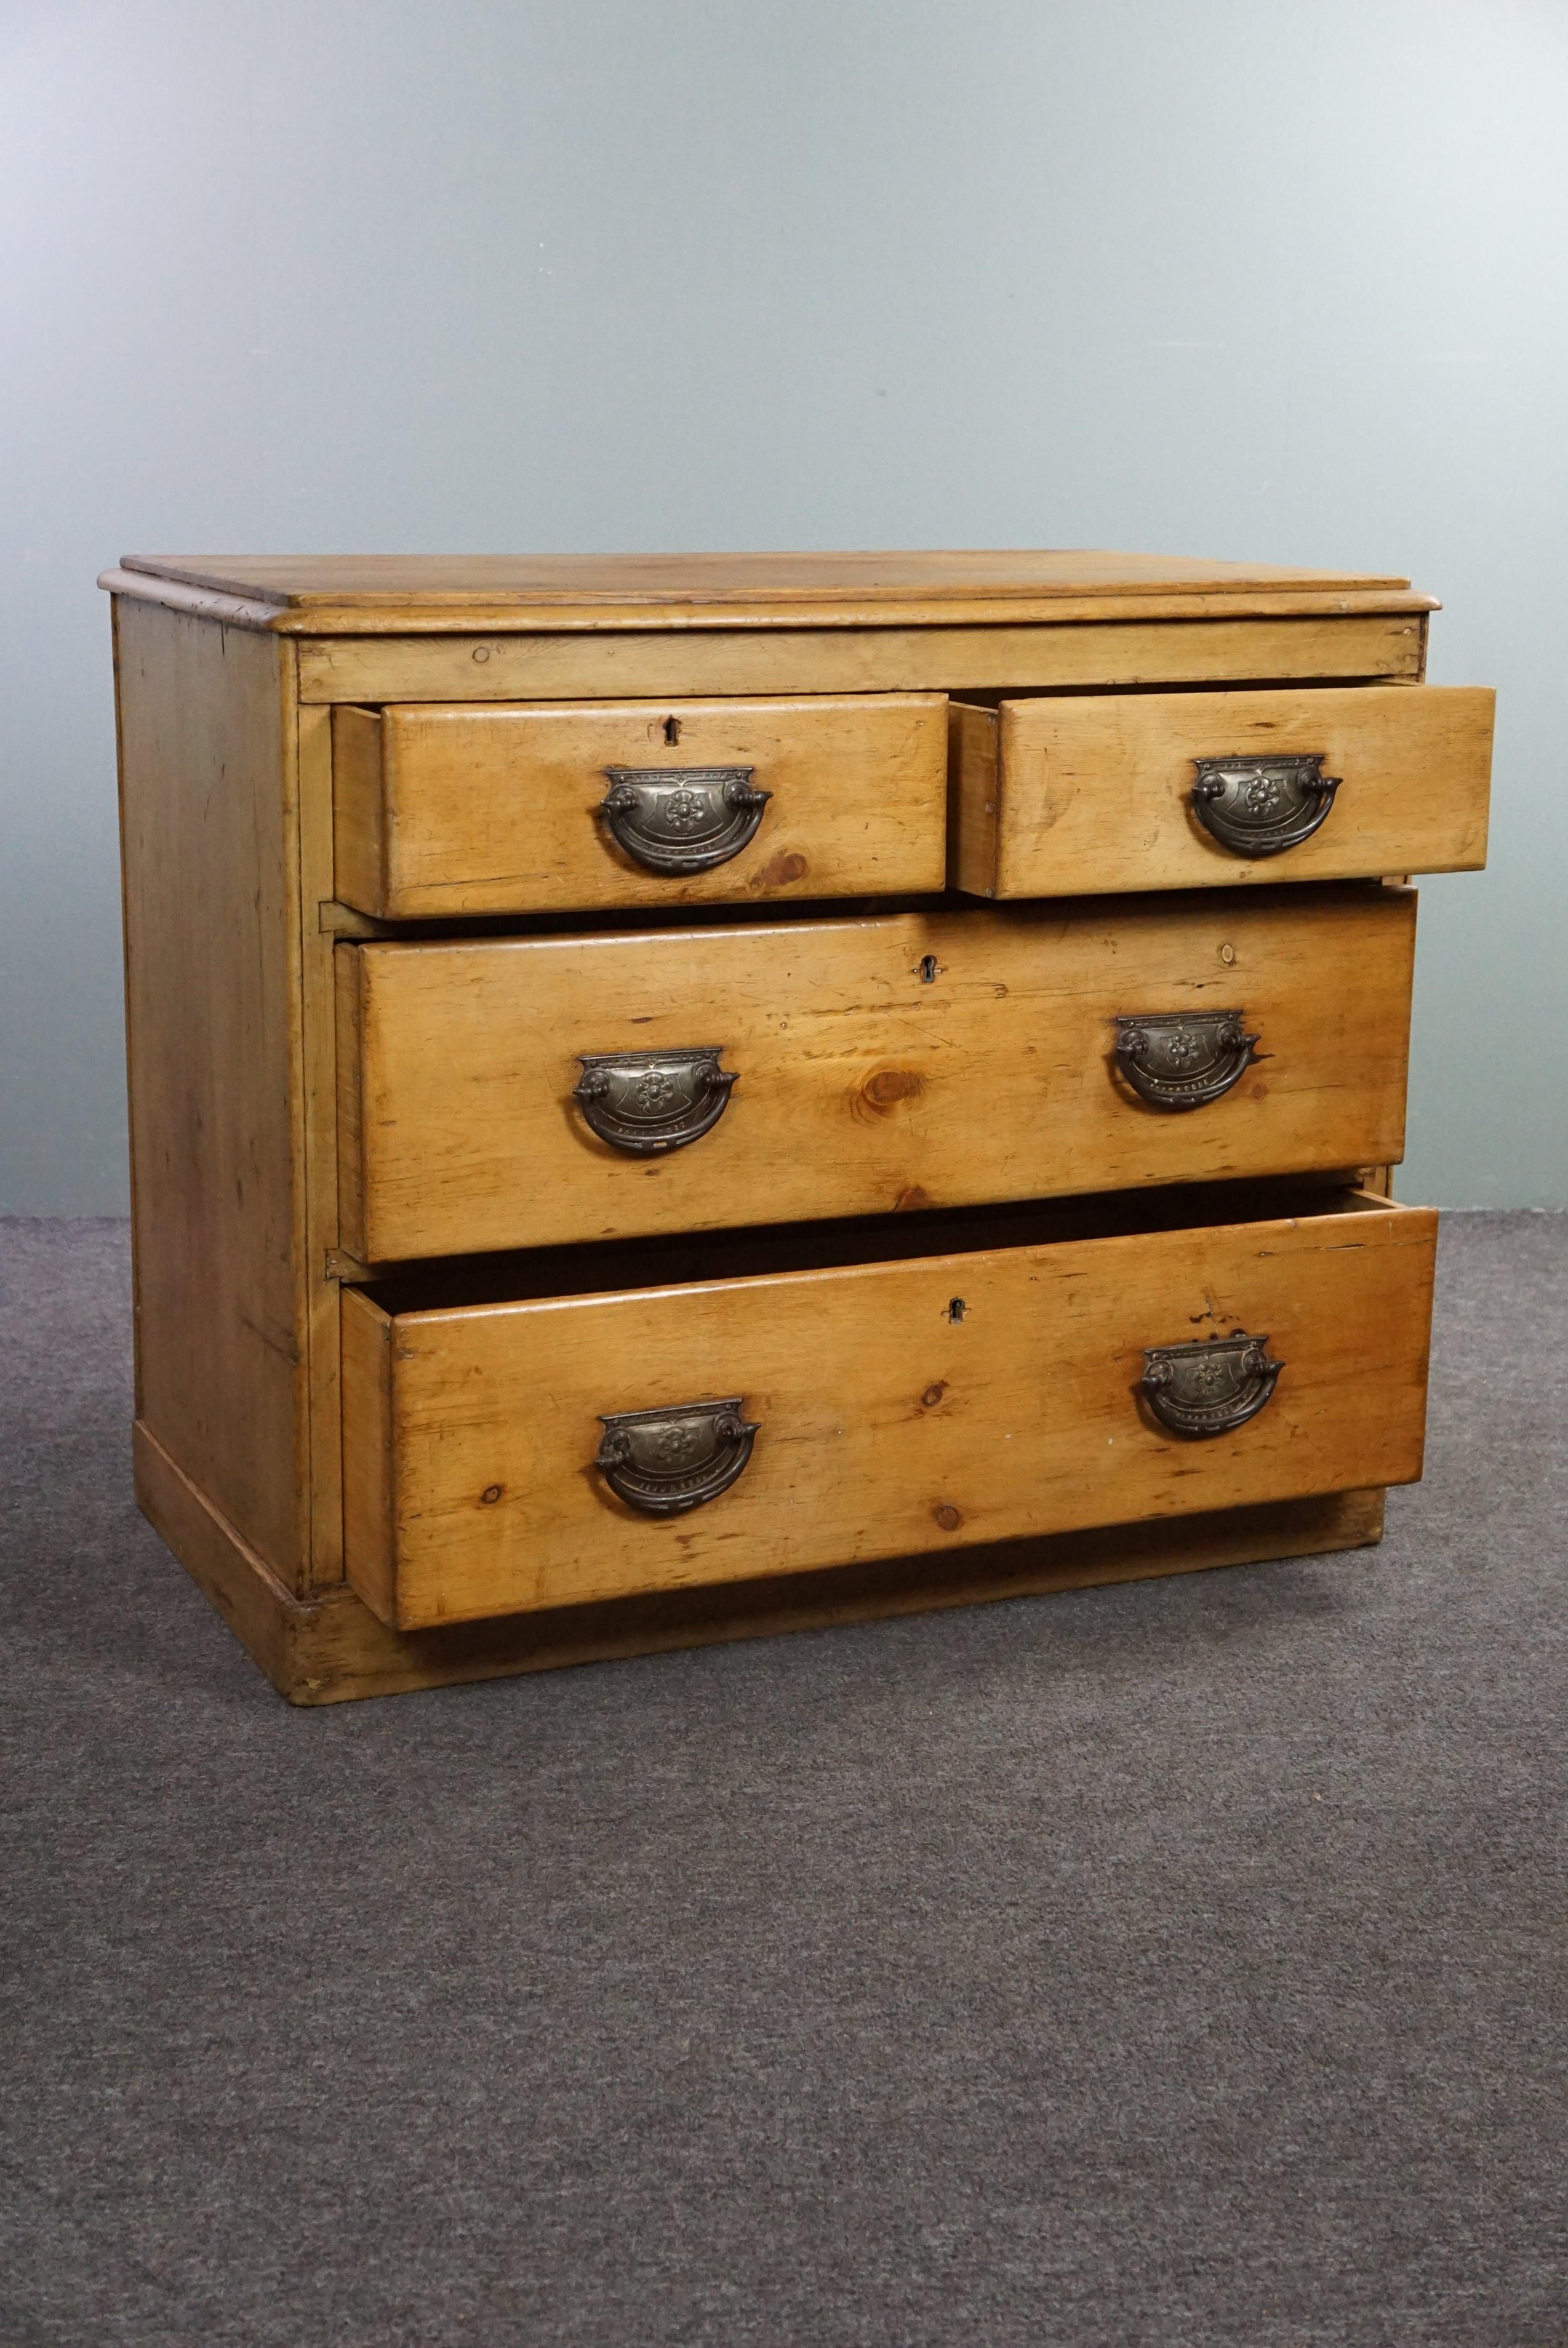 Offered is this beautiful light old pine chest of drawers.

This Victorian English chest of drawers, from the 19th century, has a beautiful warm honey-like color. The four well-functioning drawers have beautiful handles with many ornate details. The